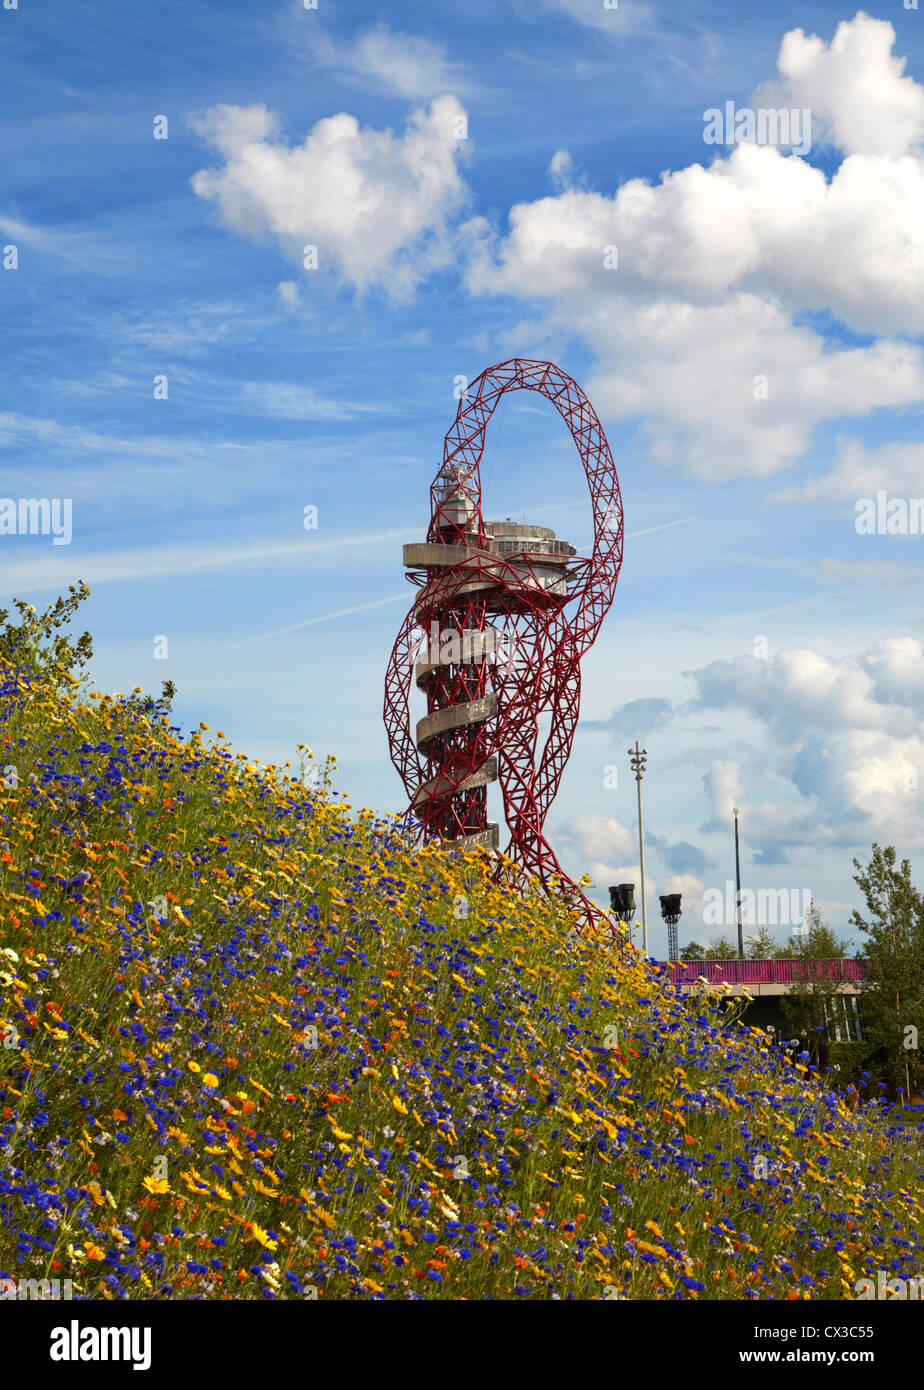 The Orbit, London 2012 Olympics, London, United Kingdom. Architect: Anish Kapoor, 2012. Overall View from nearby canal. Stock Photo